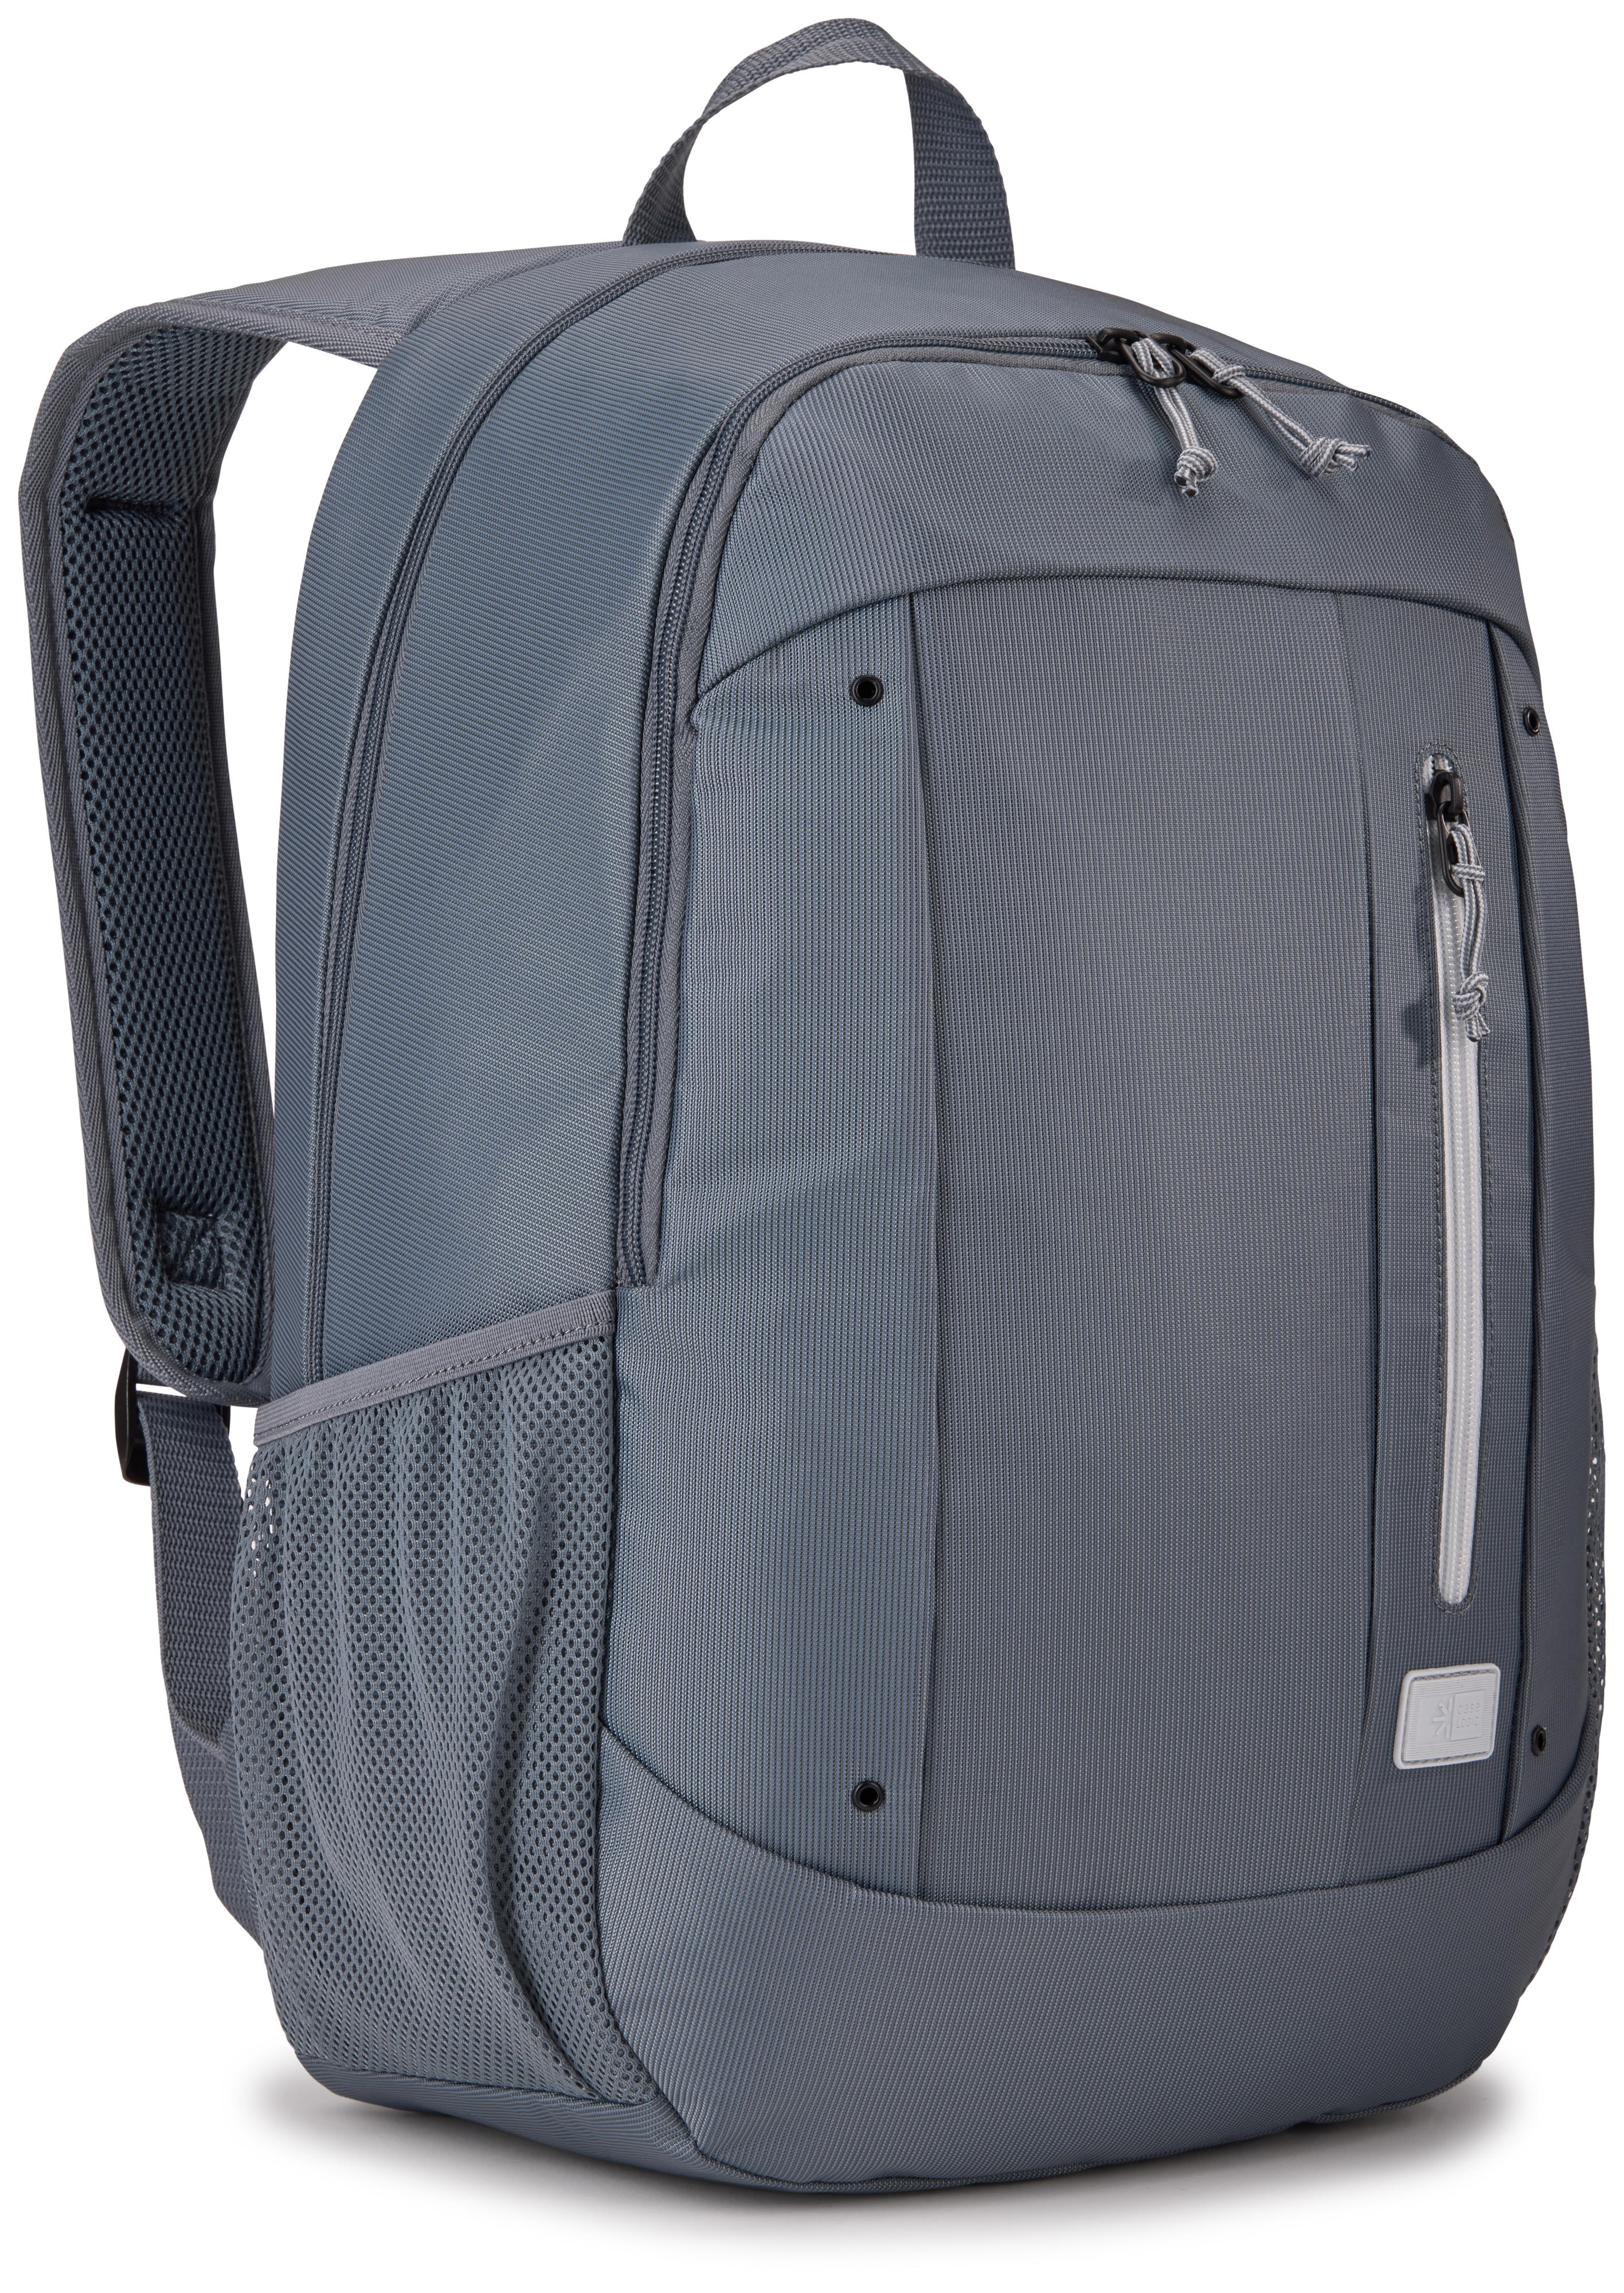 Case Logic Jaunt Recycled Backpack 15.6-Inch - Stormy Weather